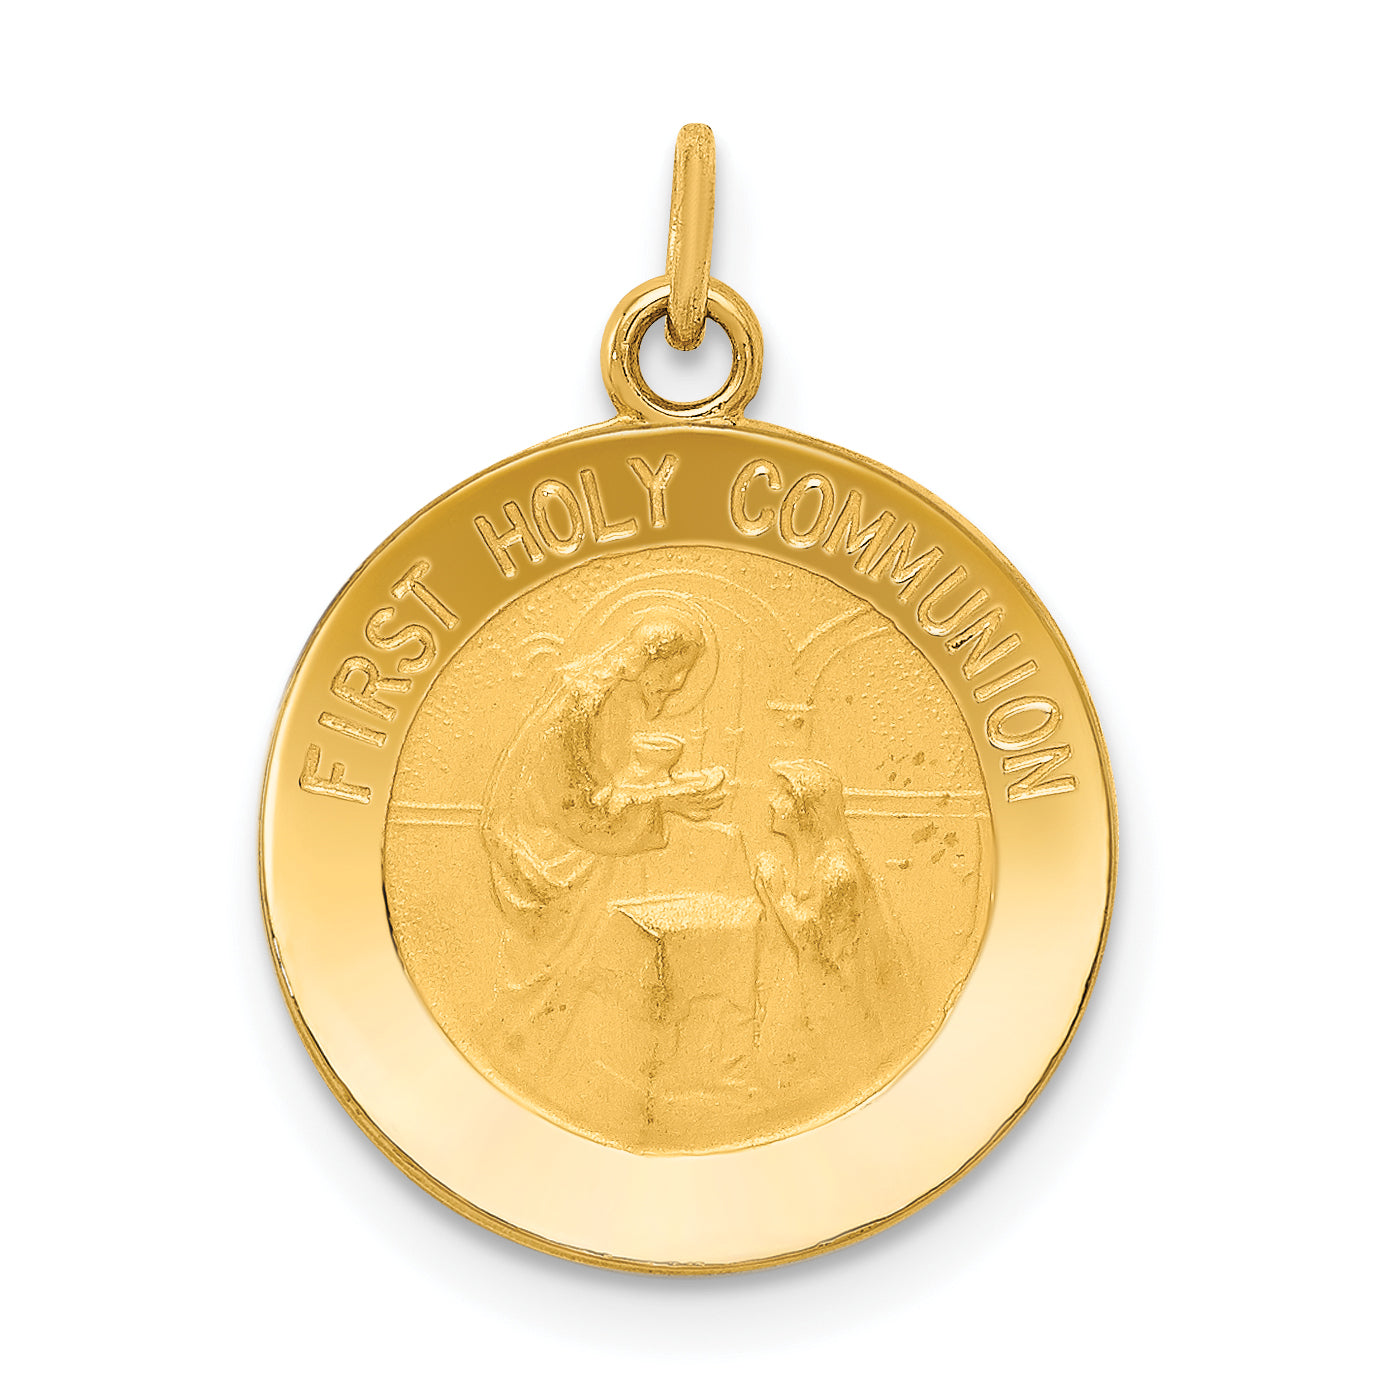 14k First Holy Communion Charm